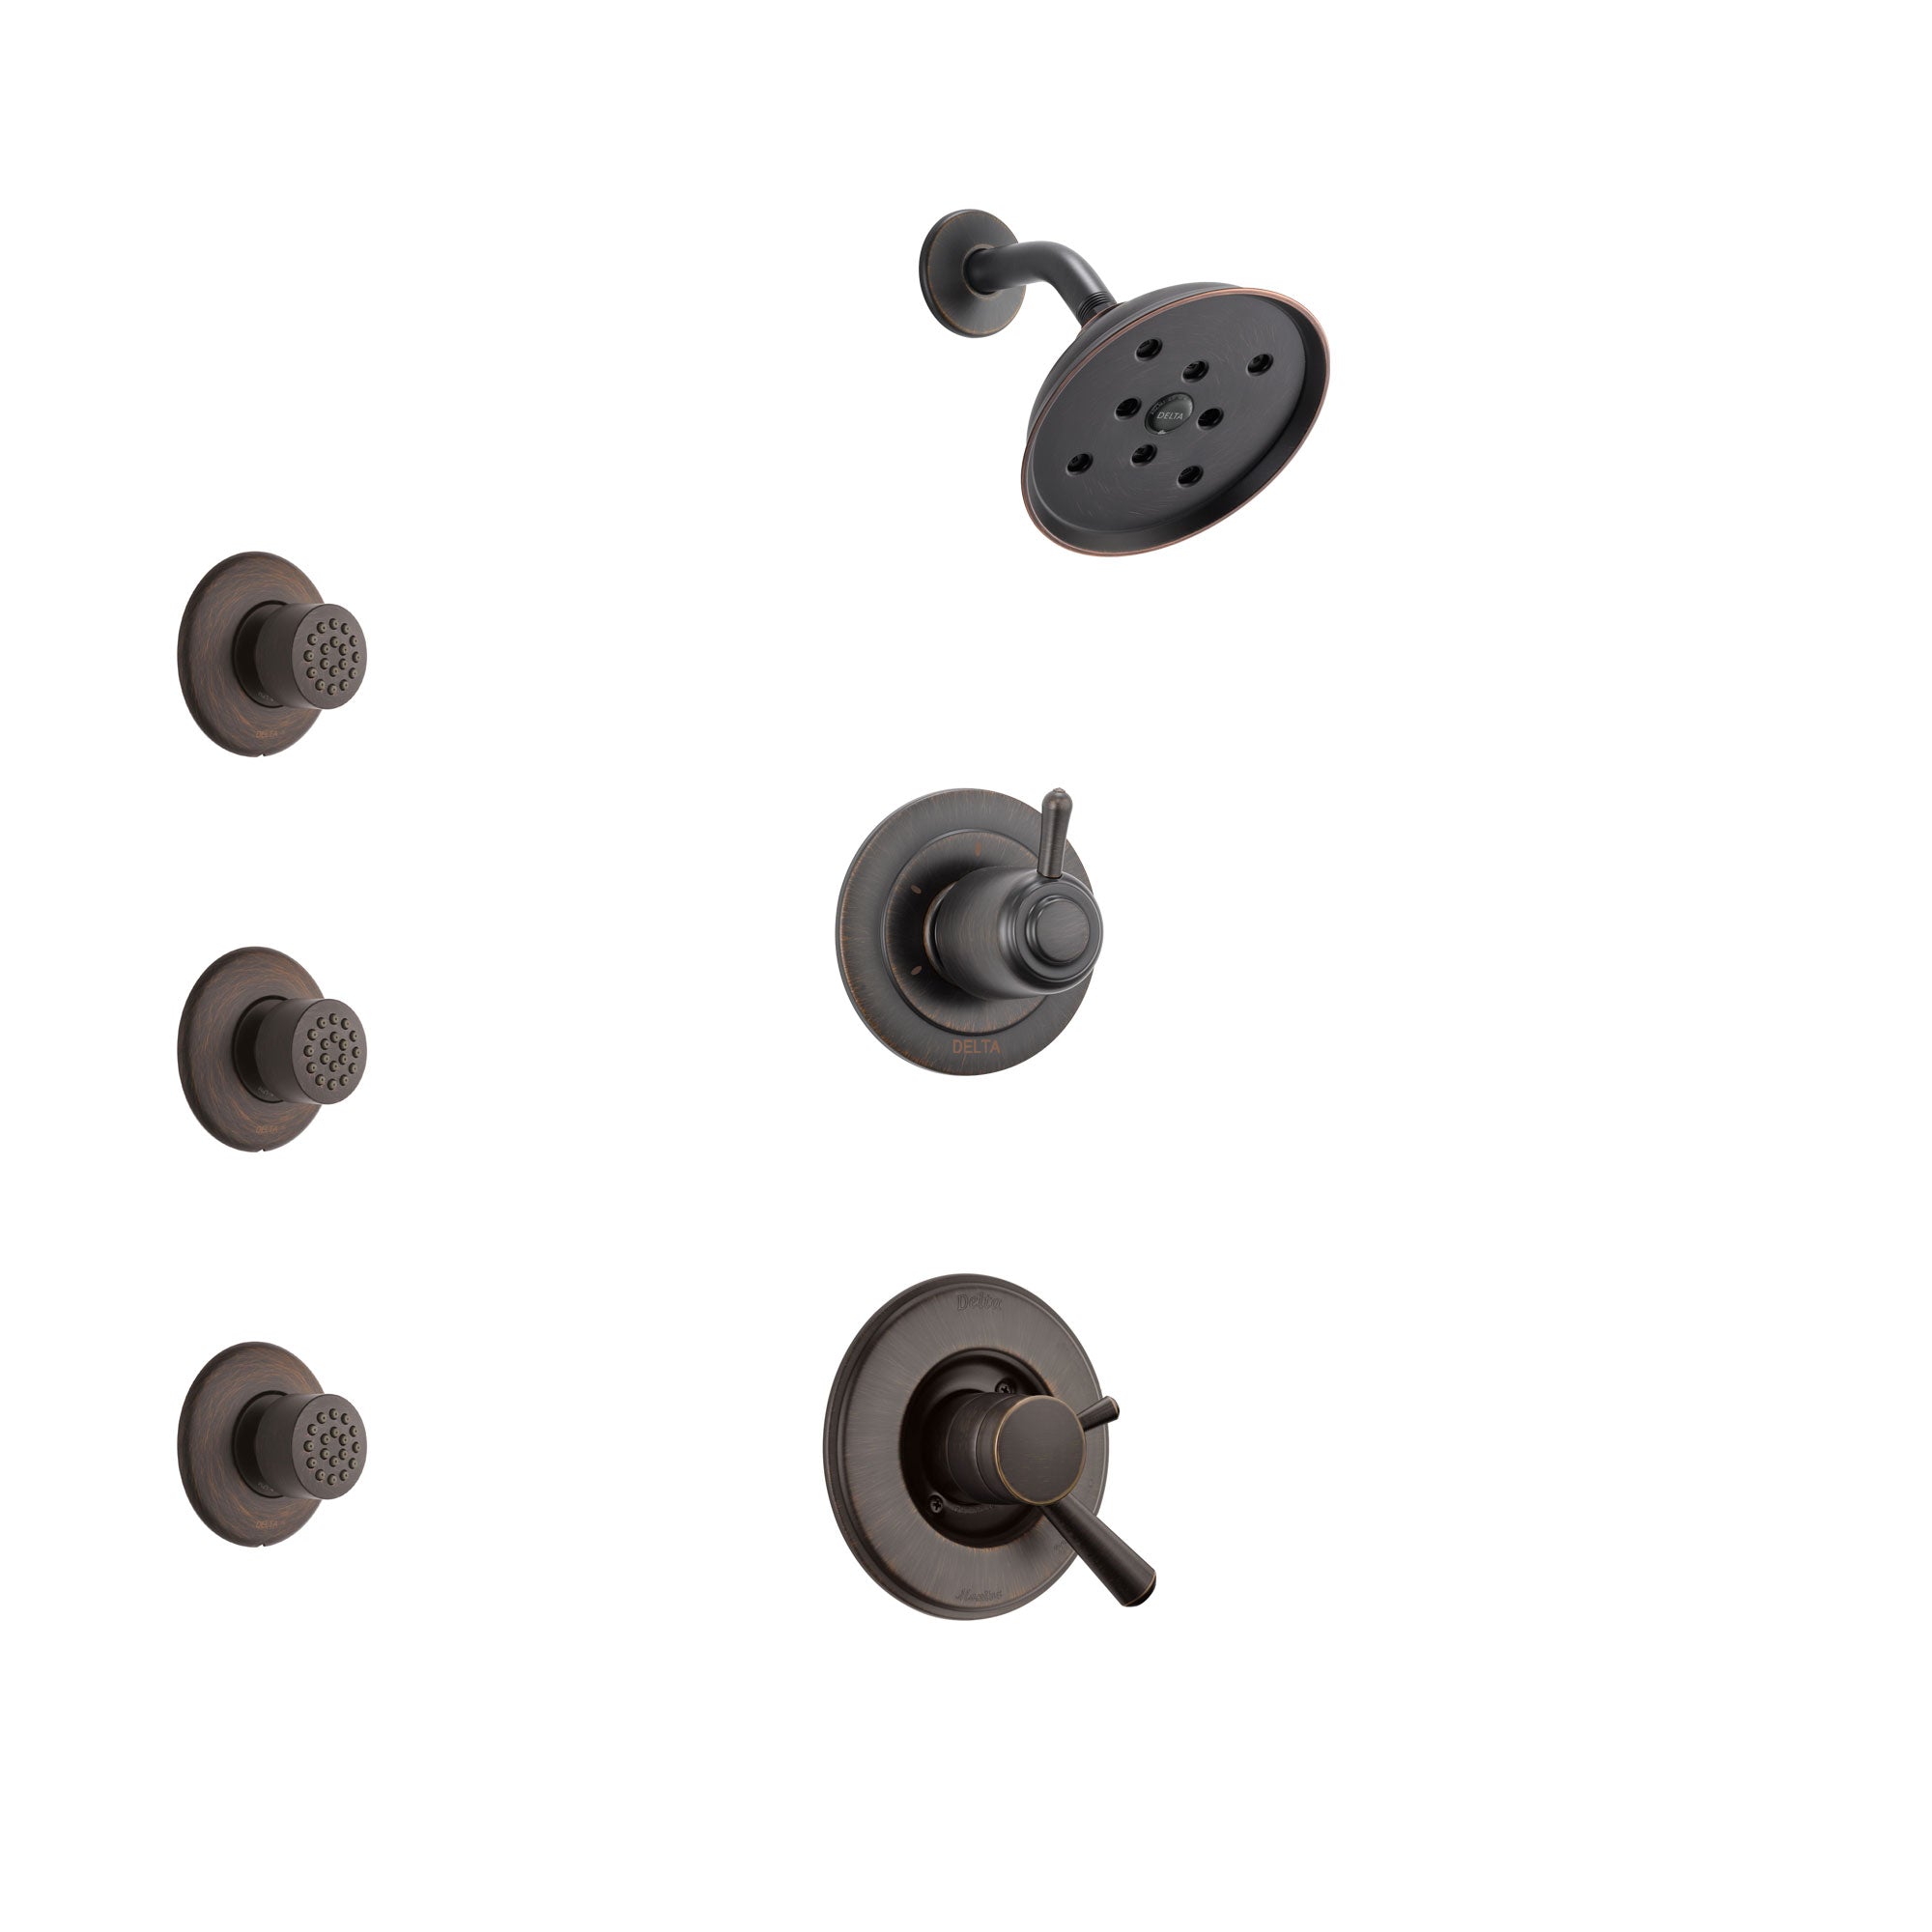 Delta Linden Venetian Bronze Finish Shower System with Dual Control Handle, 3-Setting Diverter, Showerhead, and 3 Body Sprays SS17293RB1